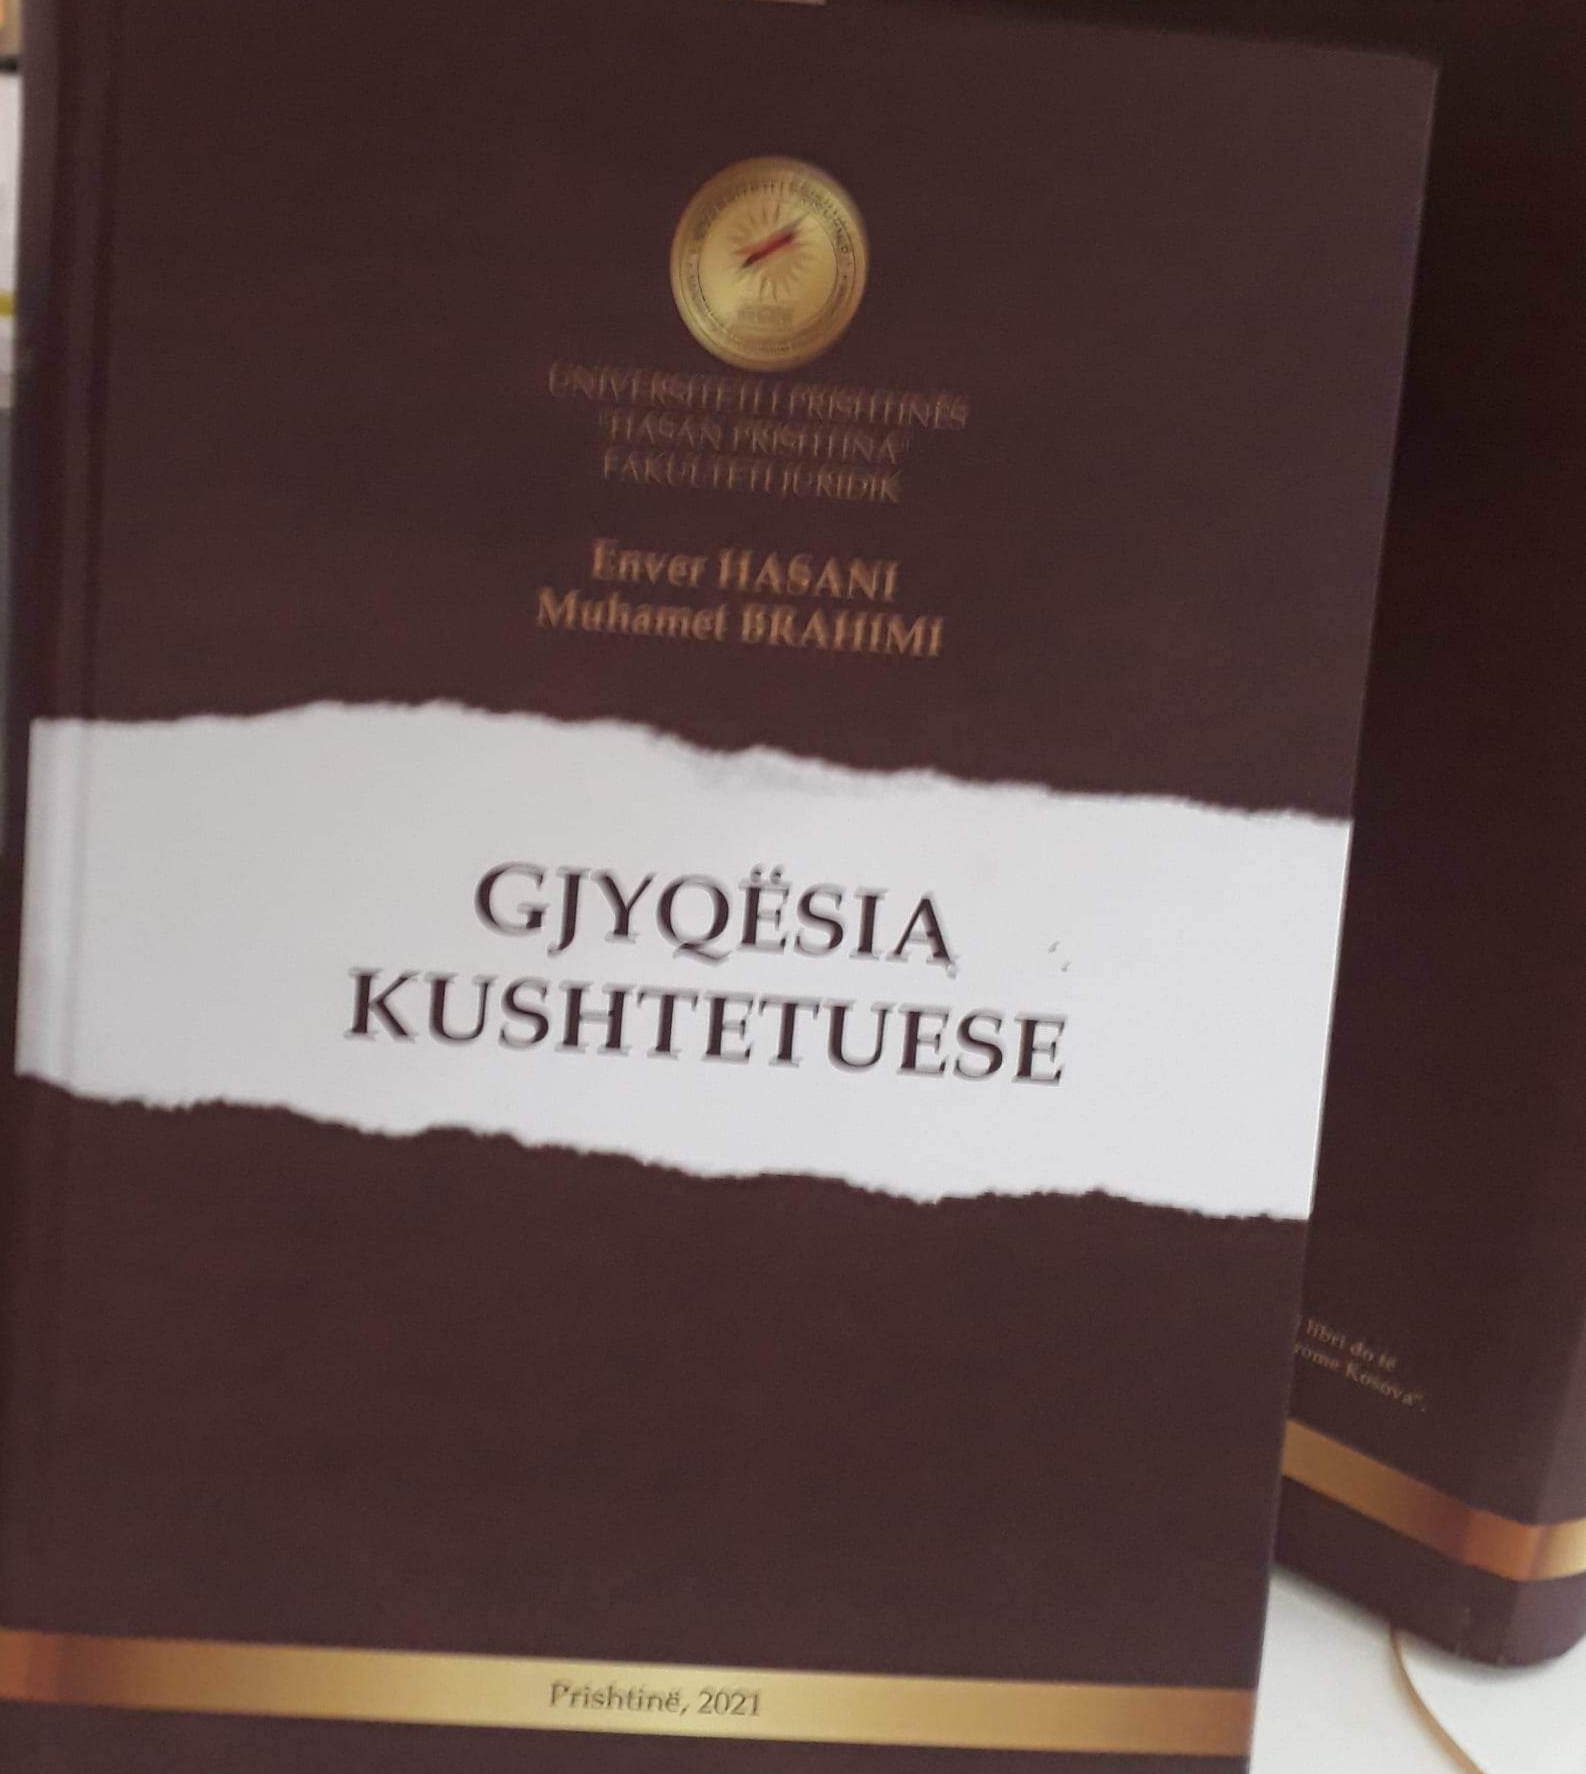 The University Library Is Enriched With Five Copies Of The Book: “Constitutional Judiciary”, By The Authors Enver Hasani And Muhamet Brahimi